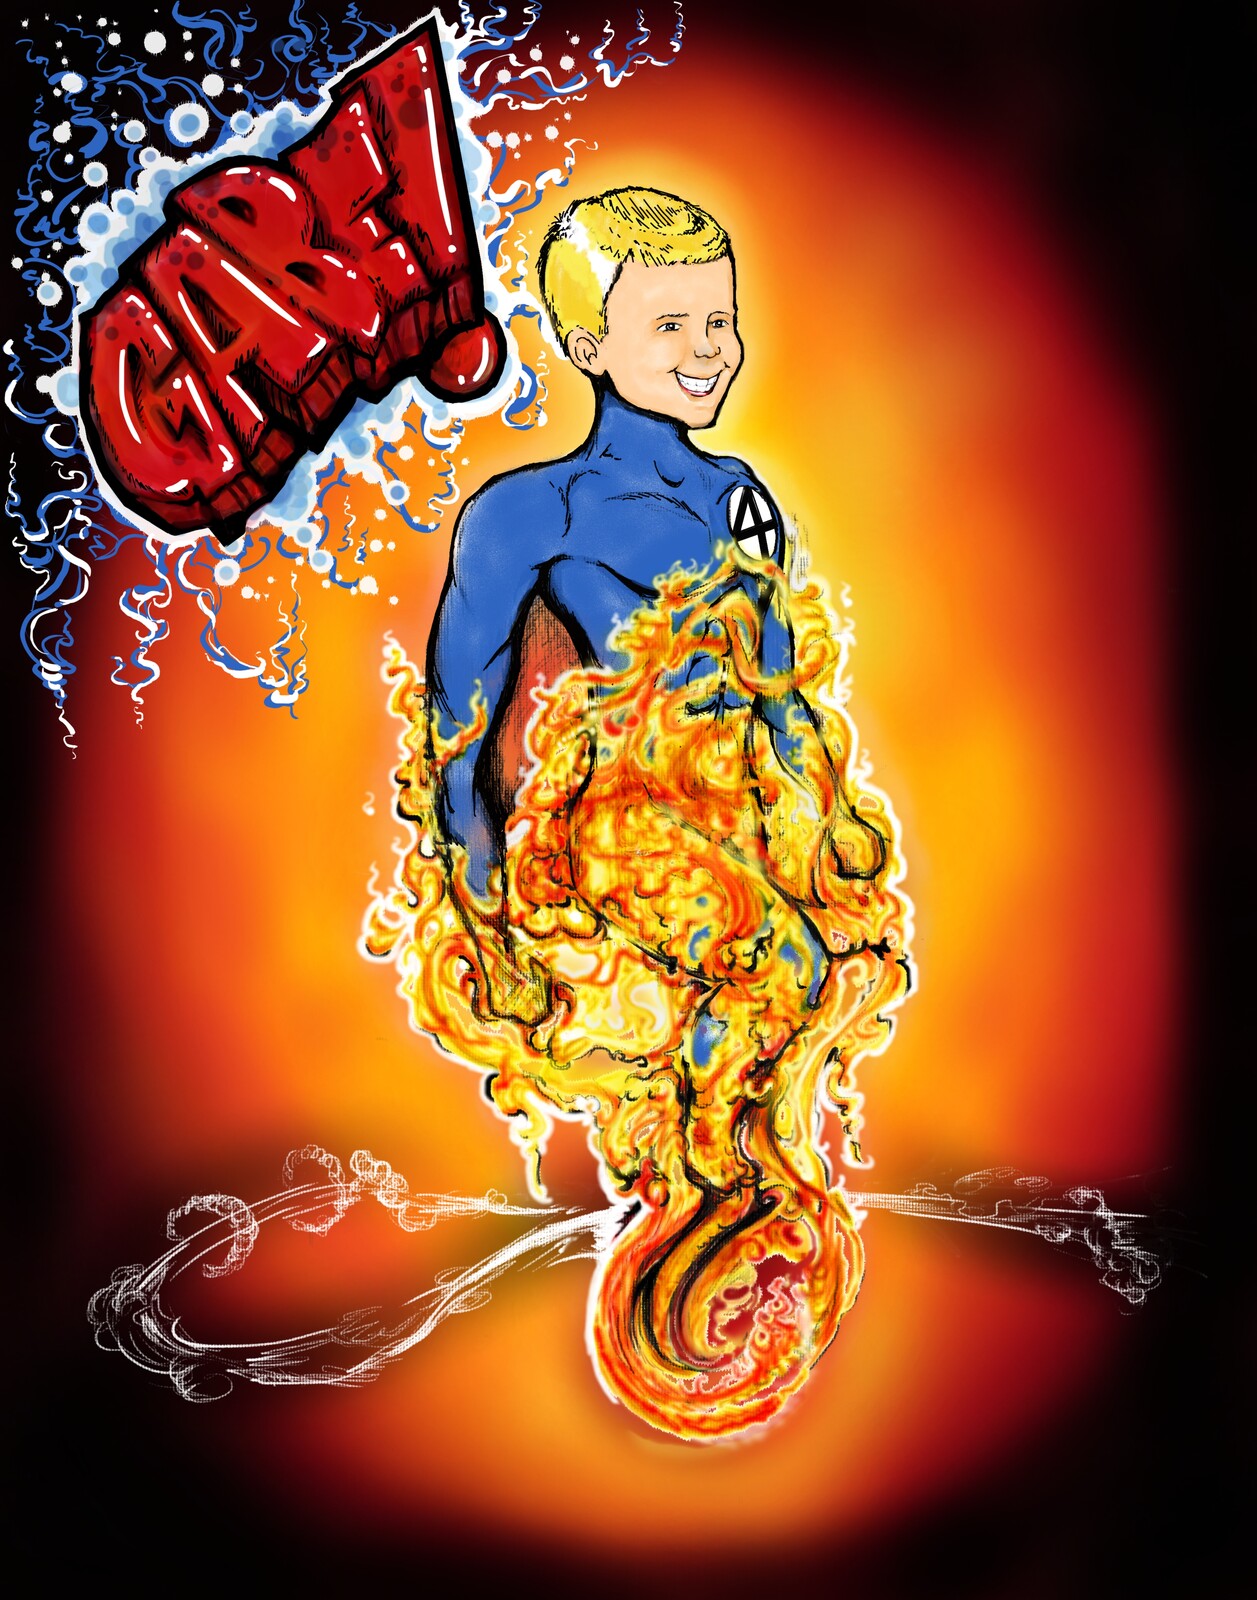 My Cousin Gabriel as The Human Torch.